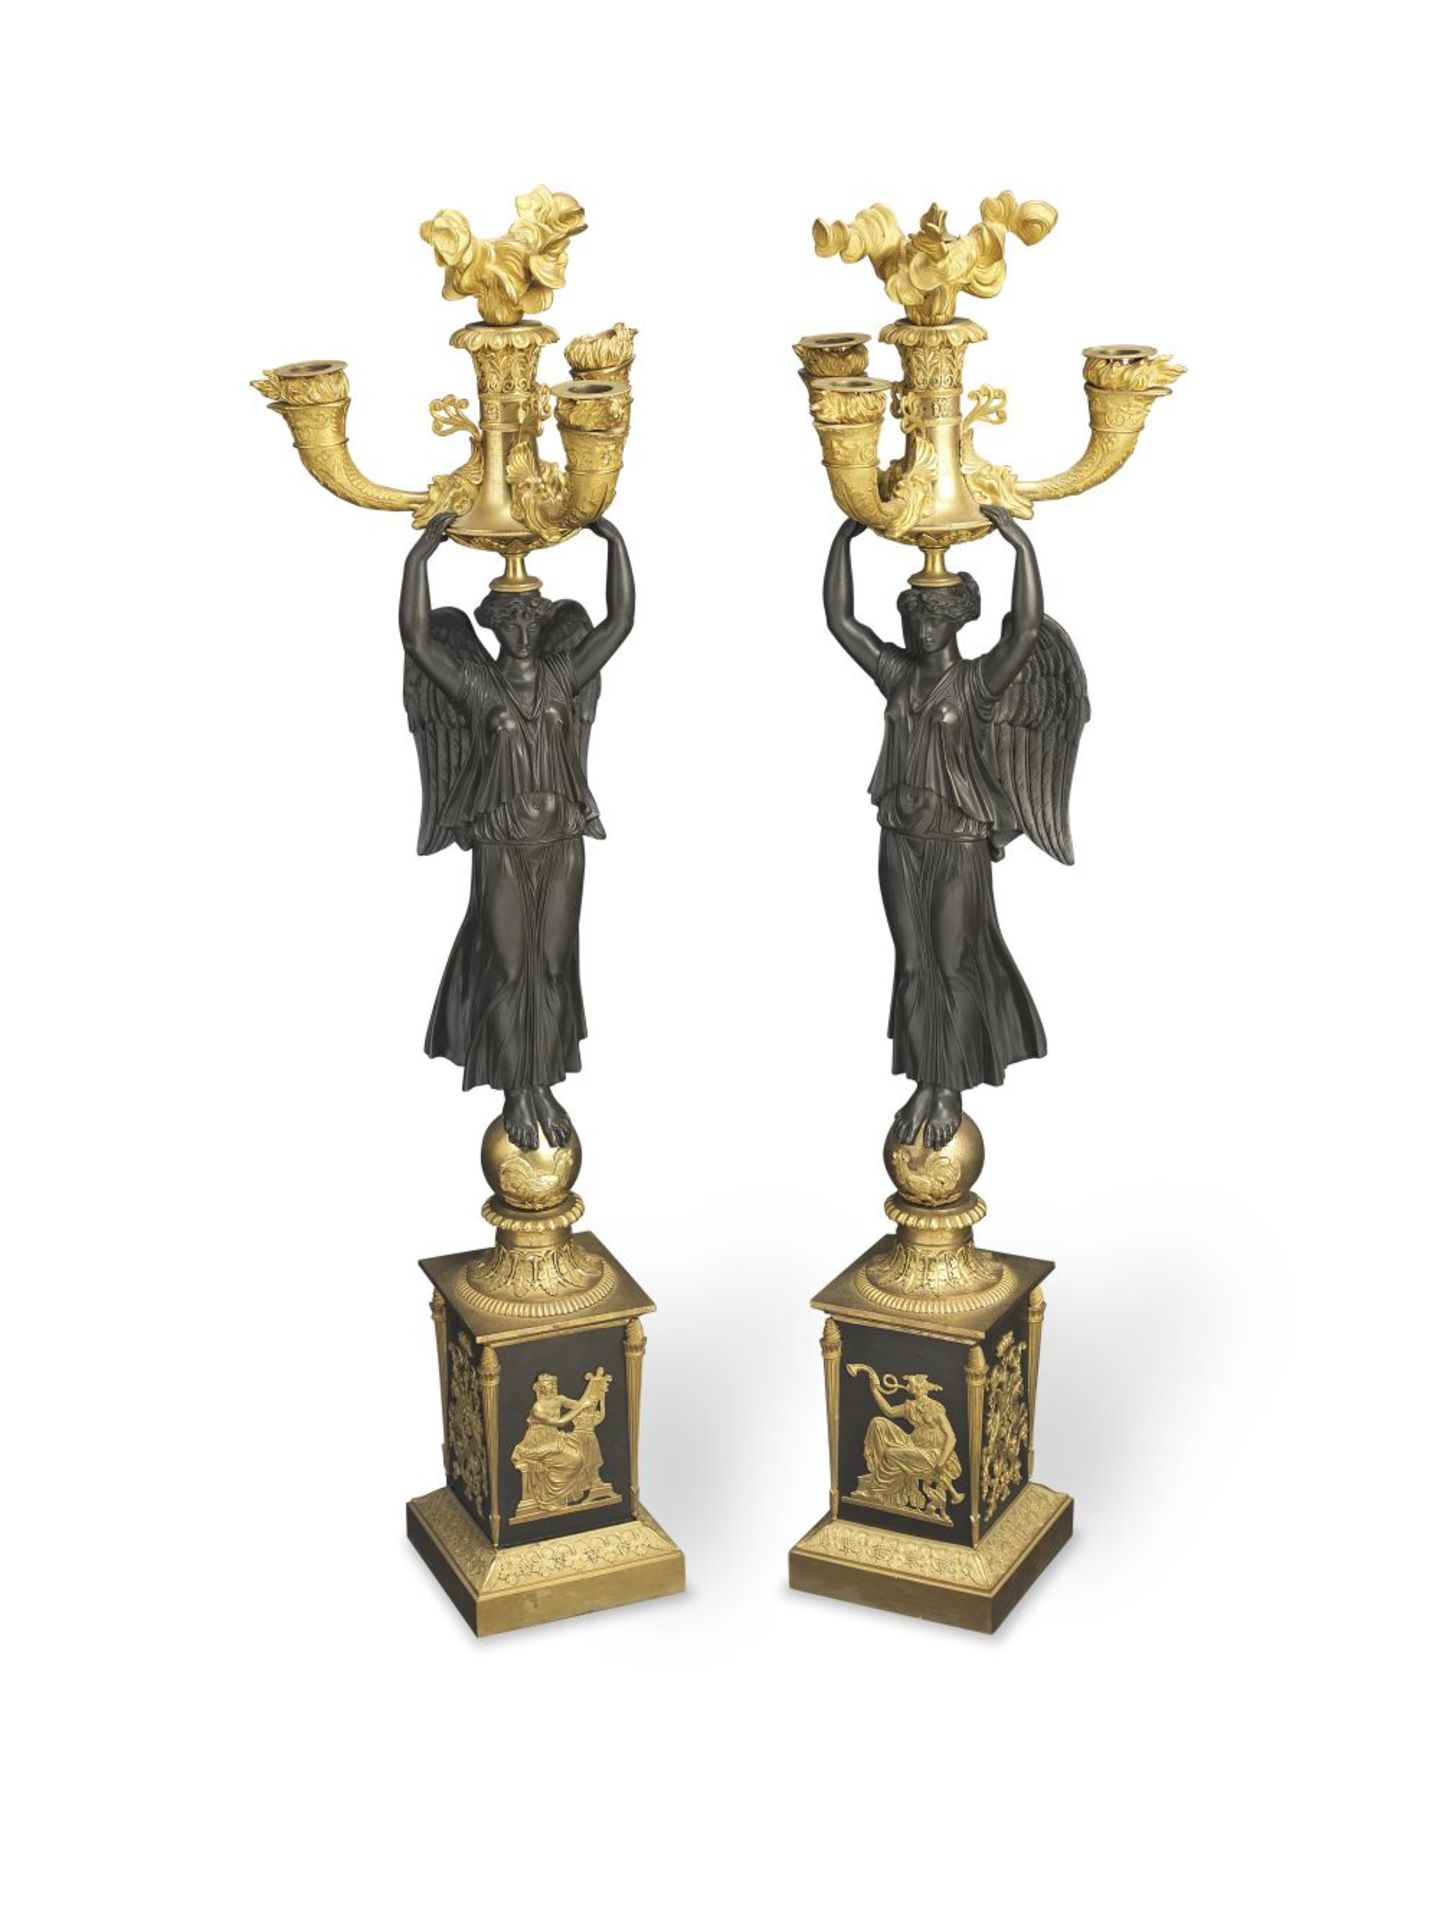 A pair of French Empire gilt and patinated bronze three branch figural candelabra circa 1810 (2)